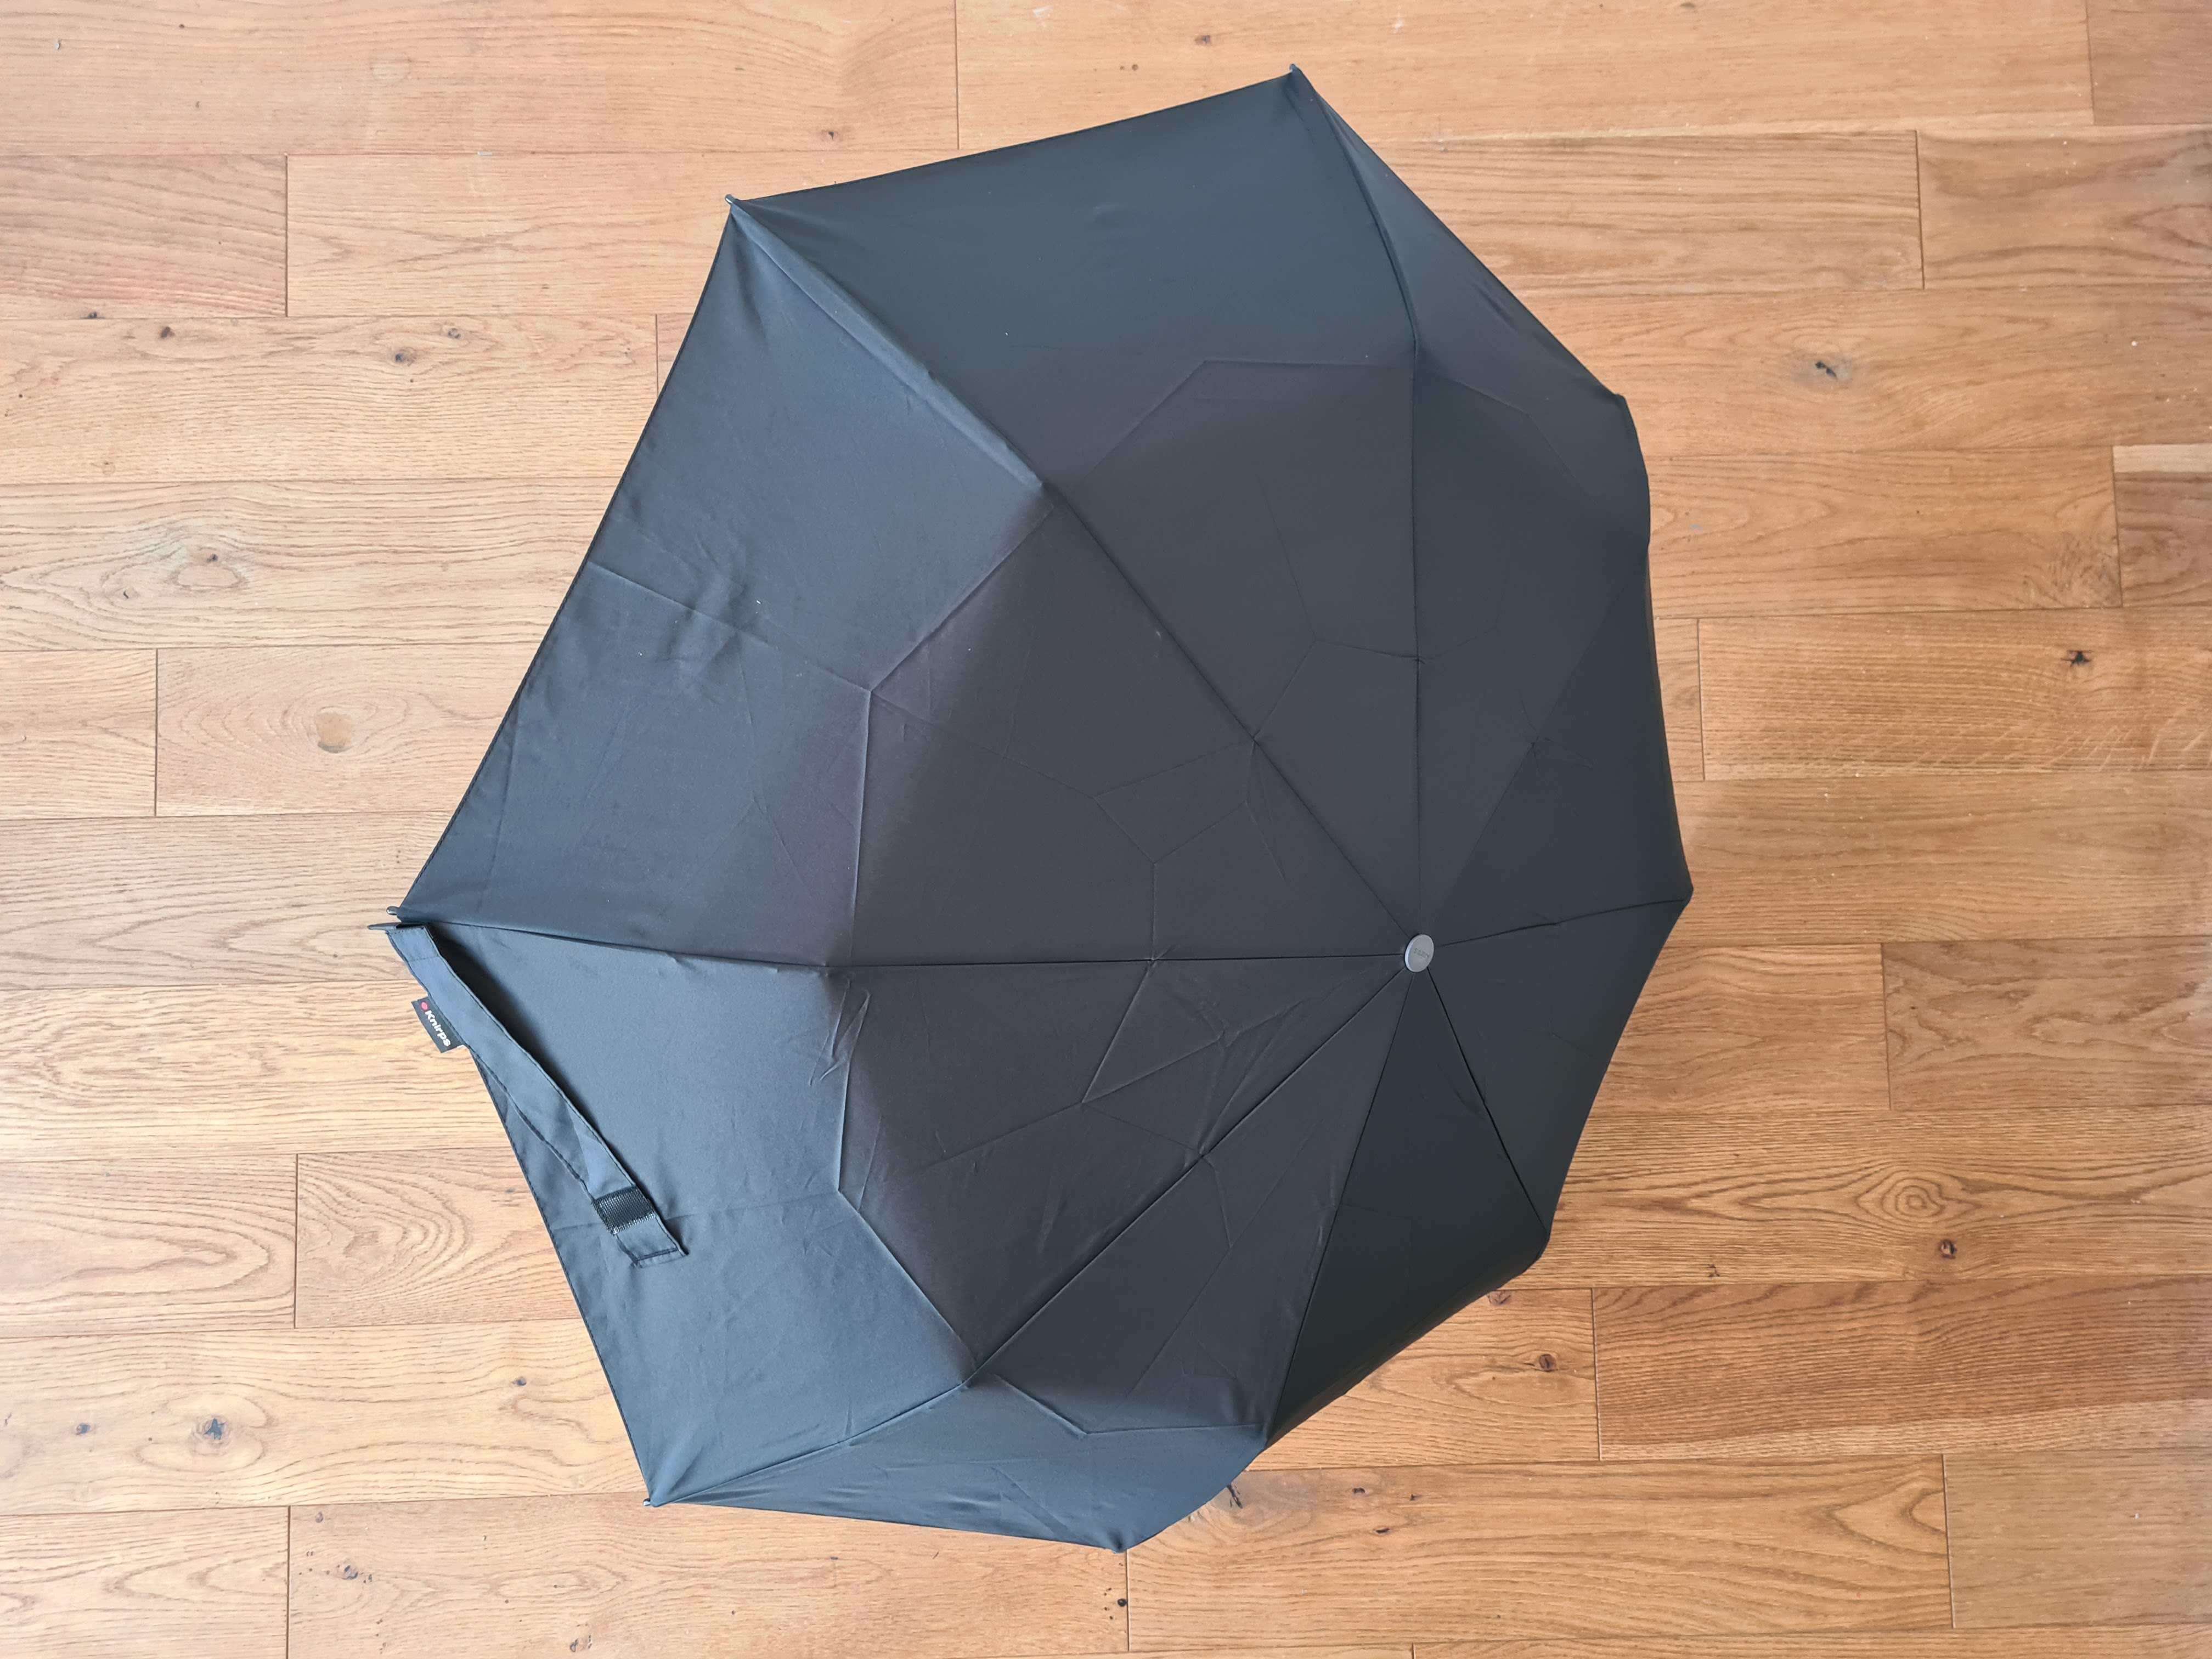 This is a larger compact umbrella from one of the oldest brands on the market